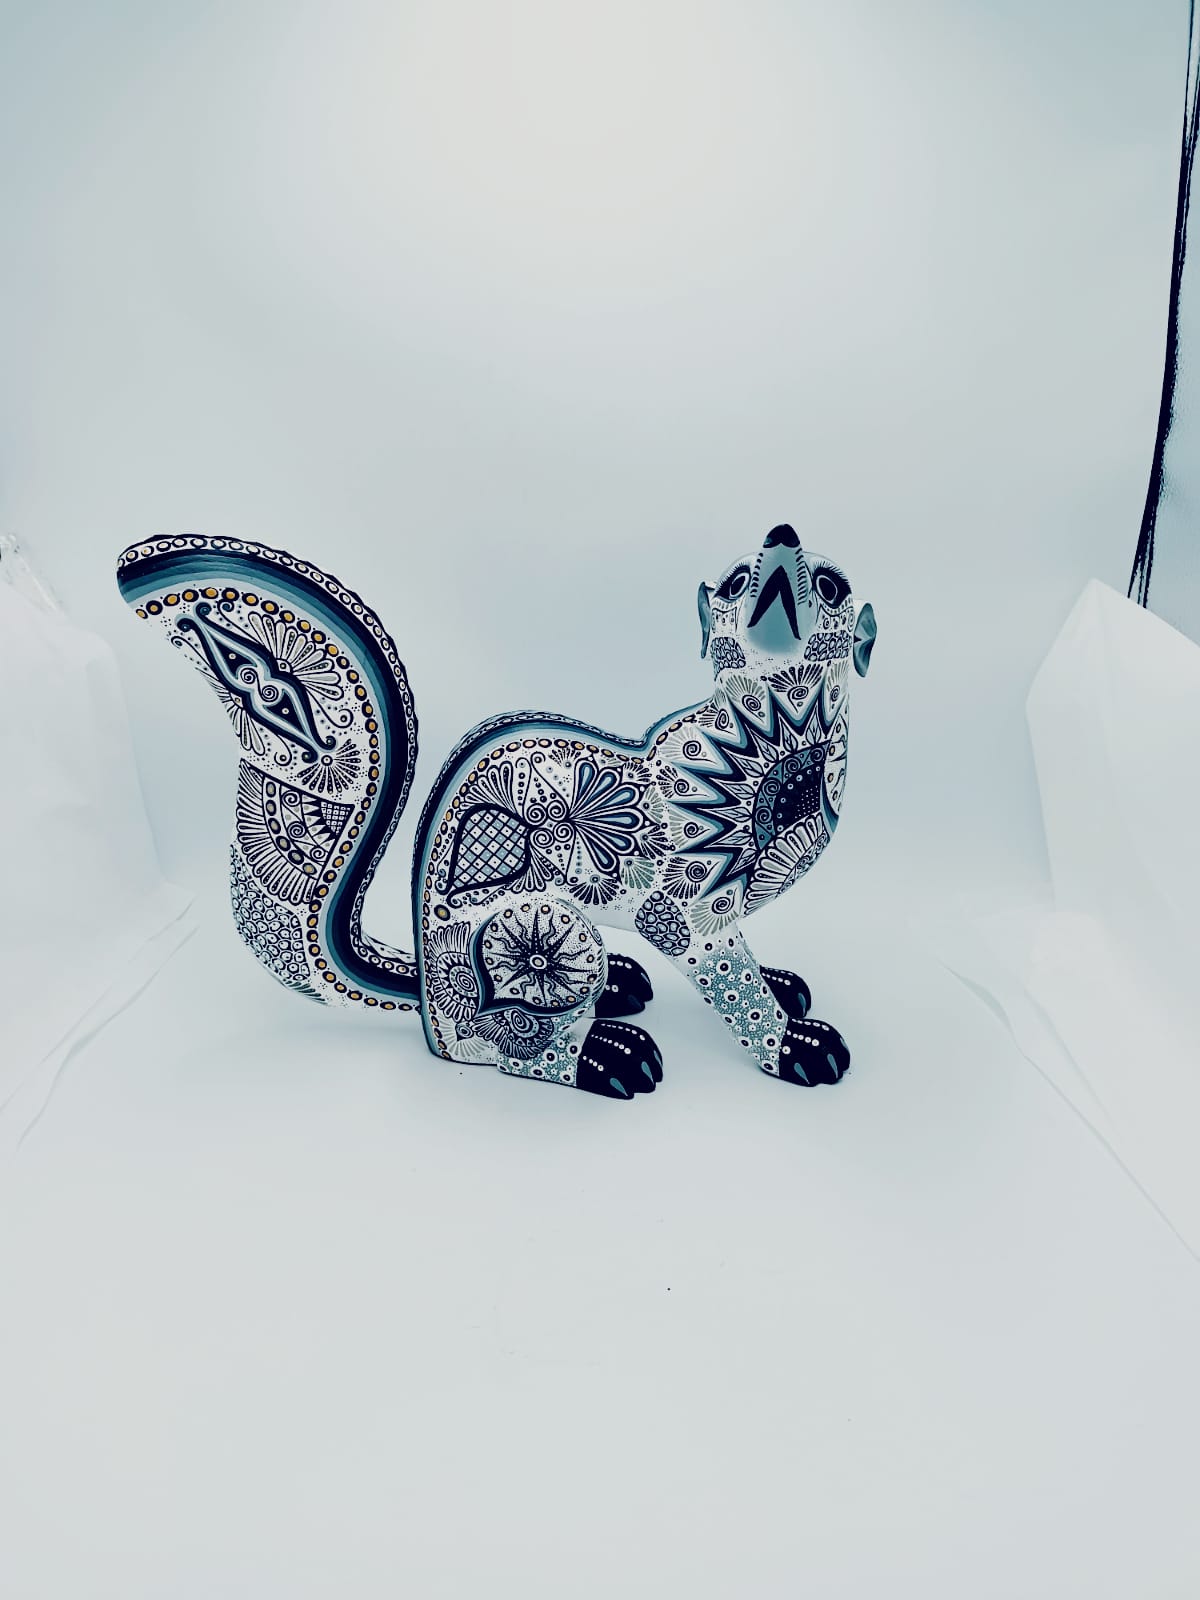 Oaxacan Wood Carving Alebrije Nahual Hand Made Coyote  By Luis Sosa PP6281